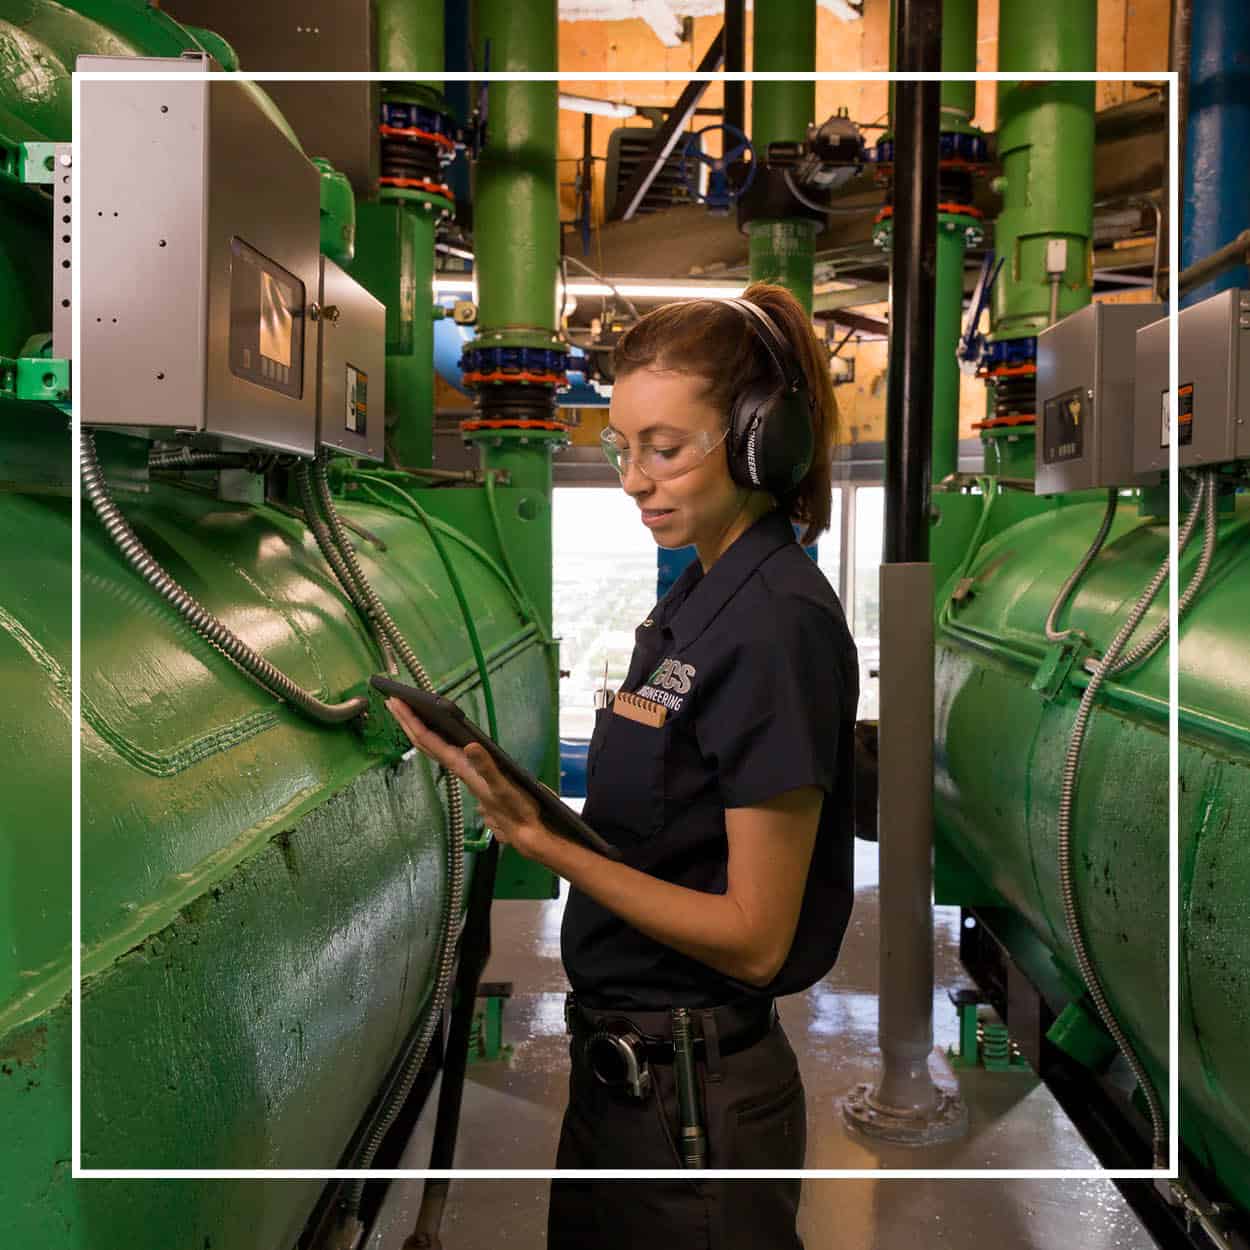 CCS engineer checking her ipad at an engineering plant